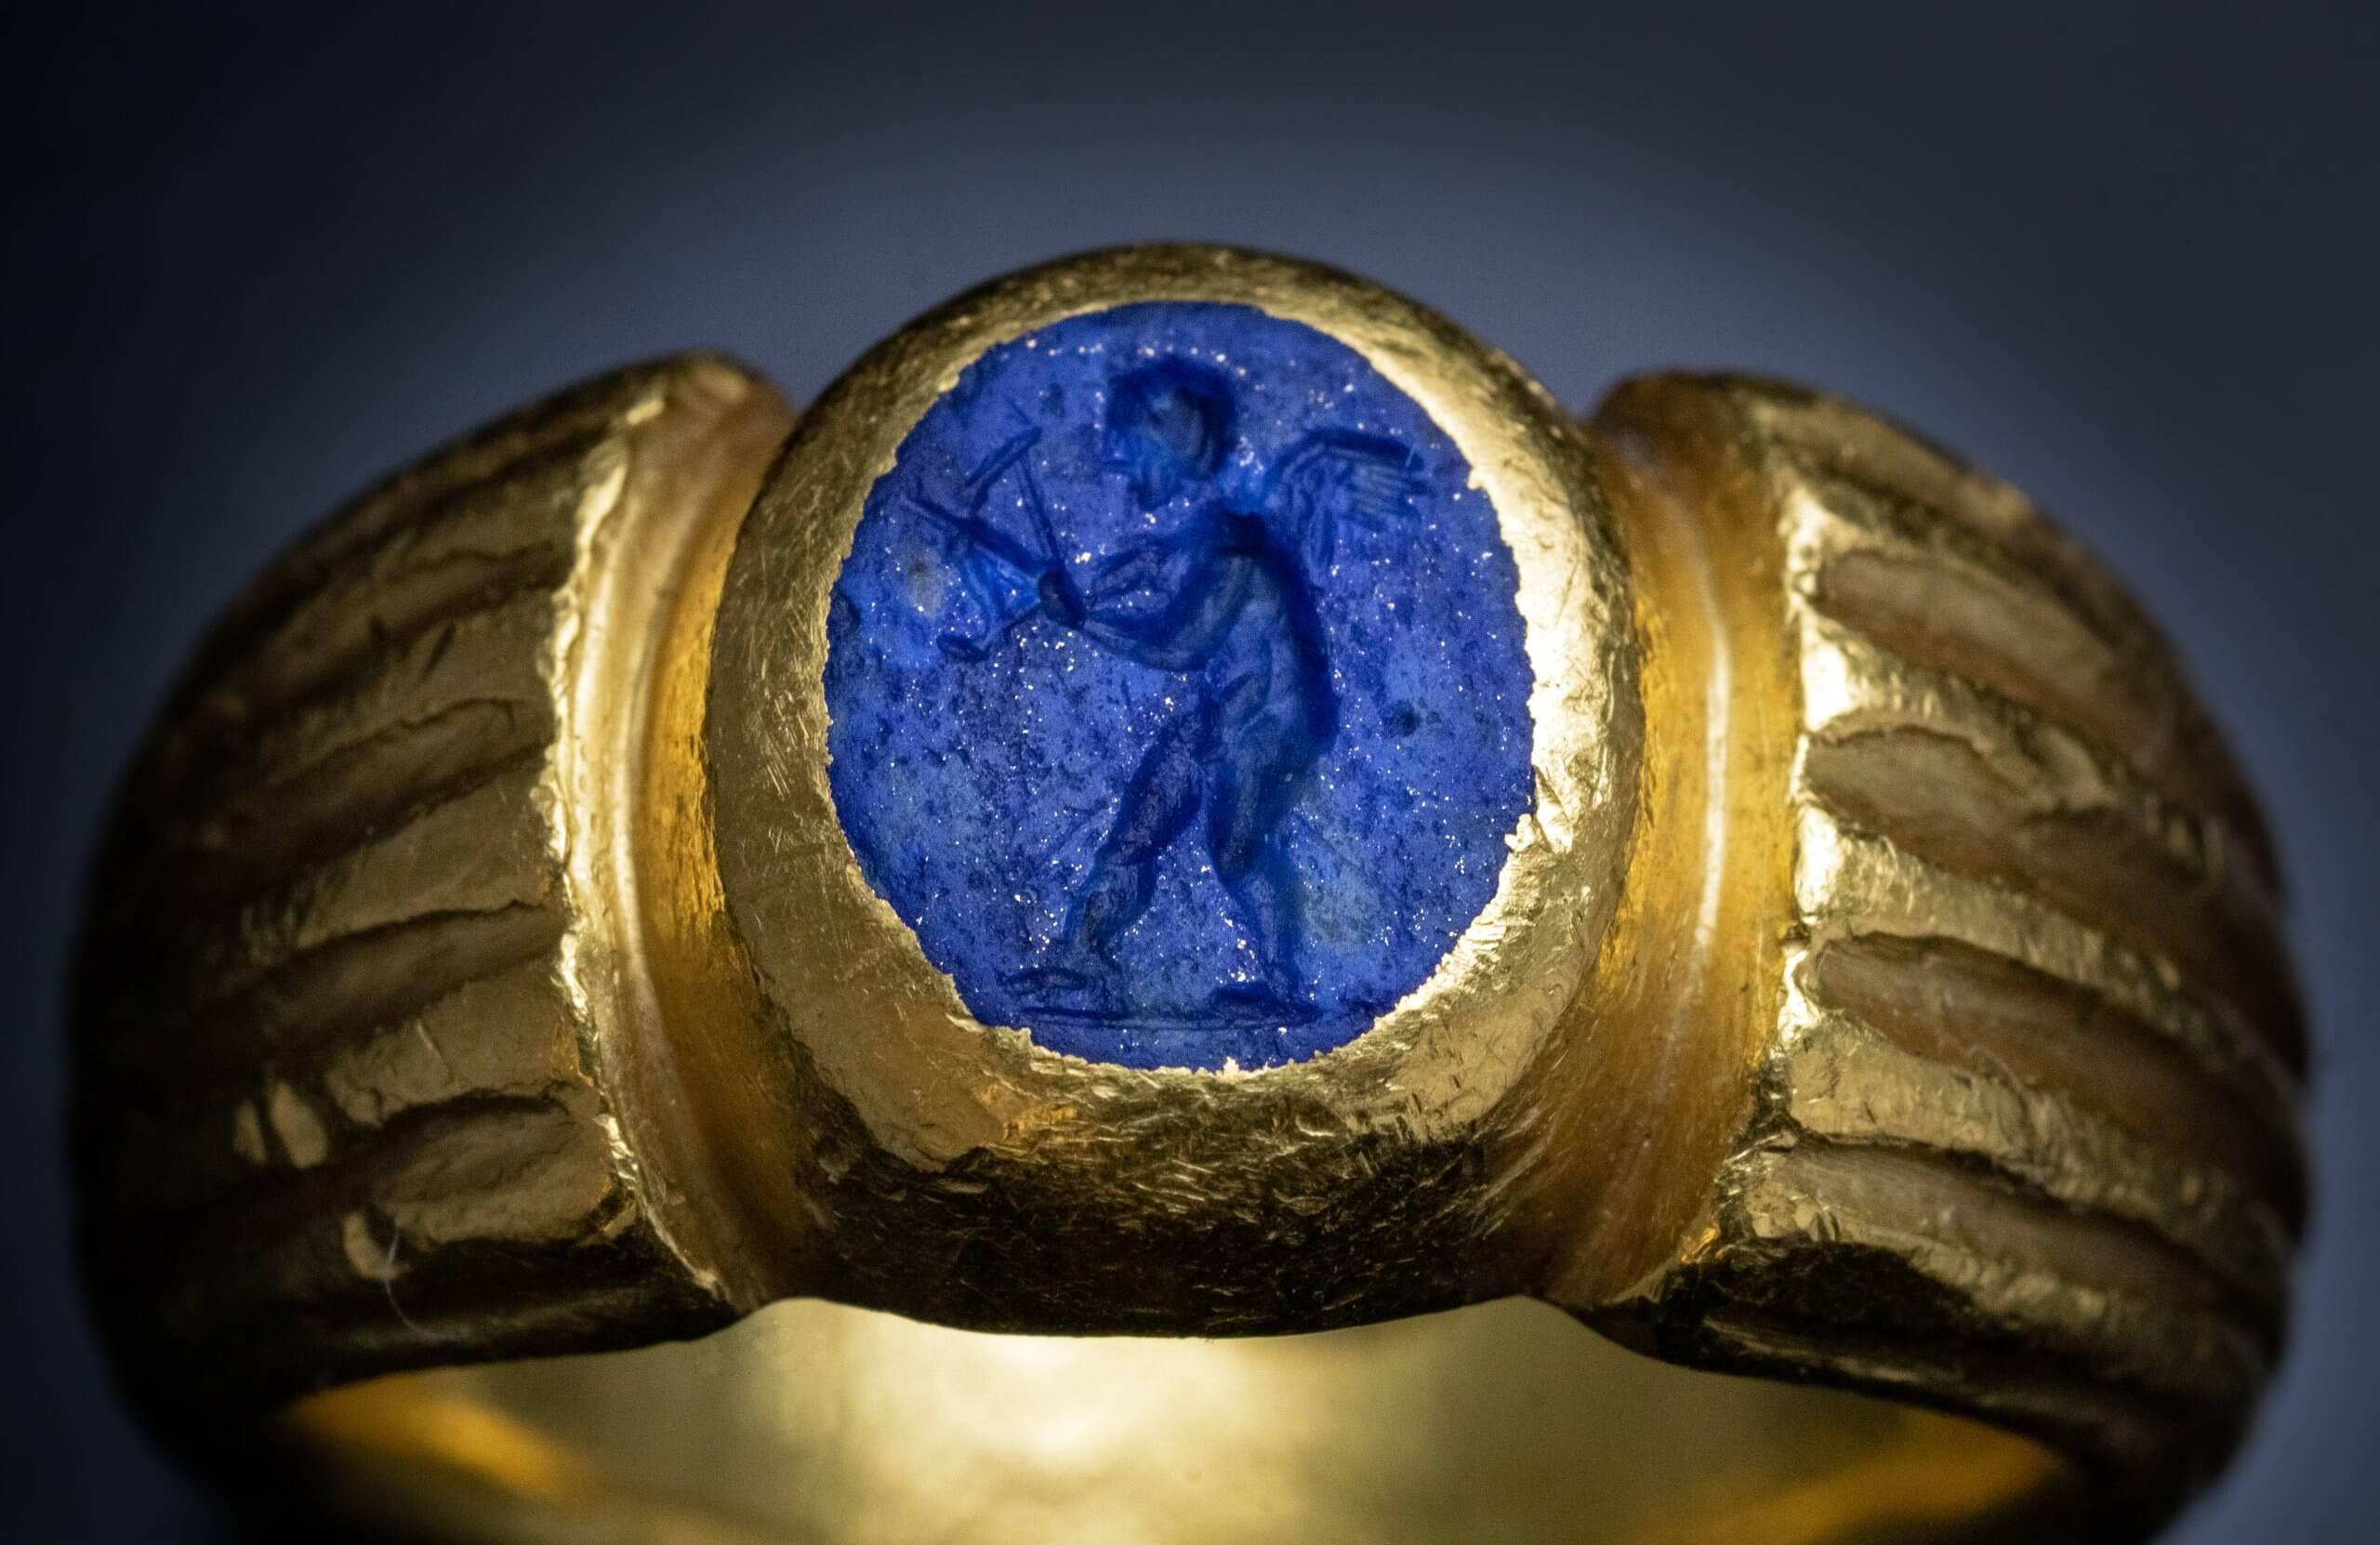 The Roman Empire, circa 2nd century A.D.  This heavy solid ring is cast in almost pure gold. The ring features a lapis lazuli intaglio finely engraved with a winged Eros (God of Love and Sexuality) armed with a bow.  The lapis intaglio is set in a